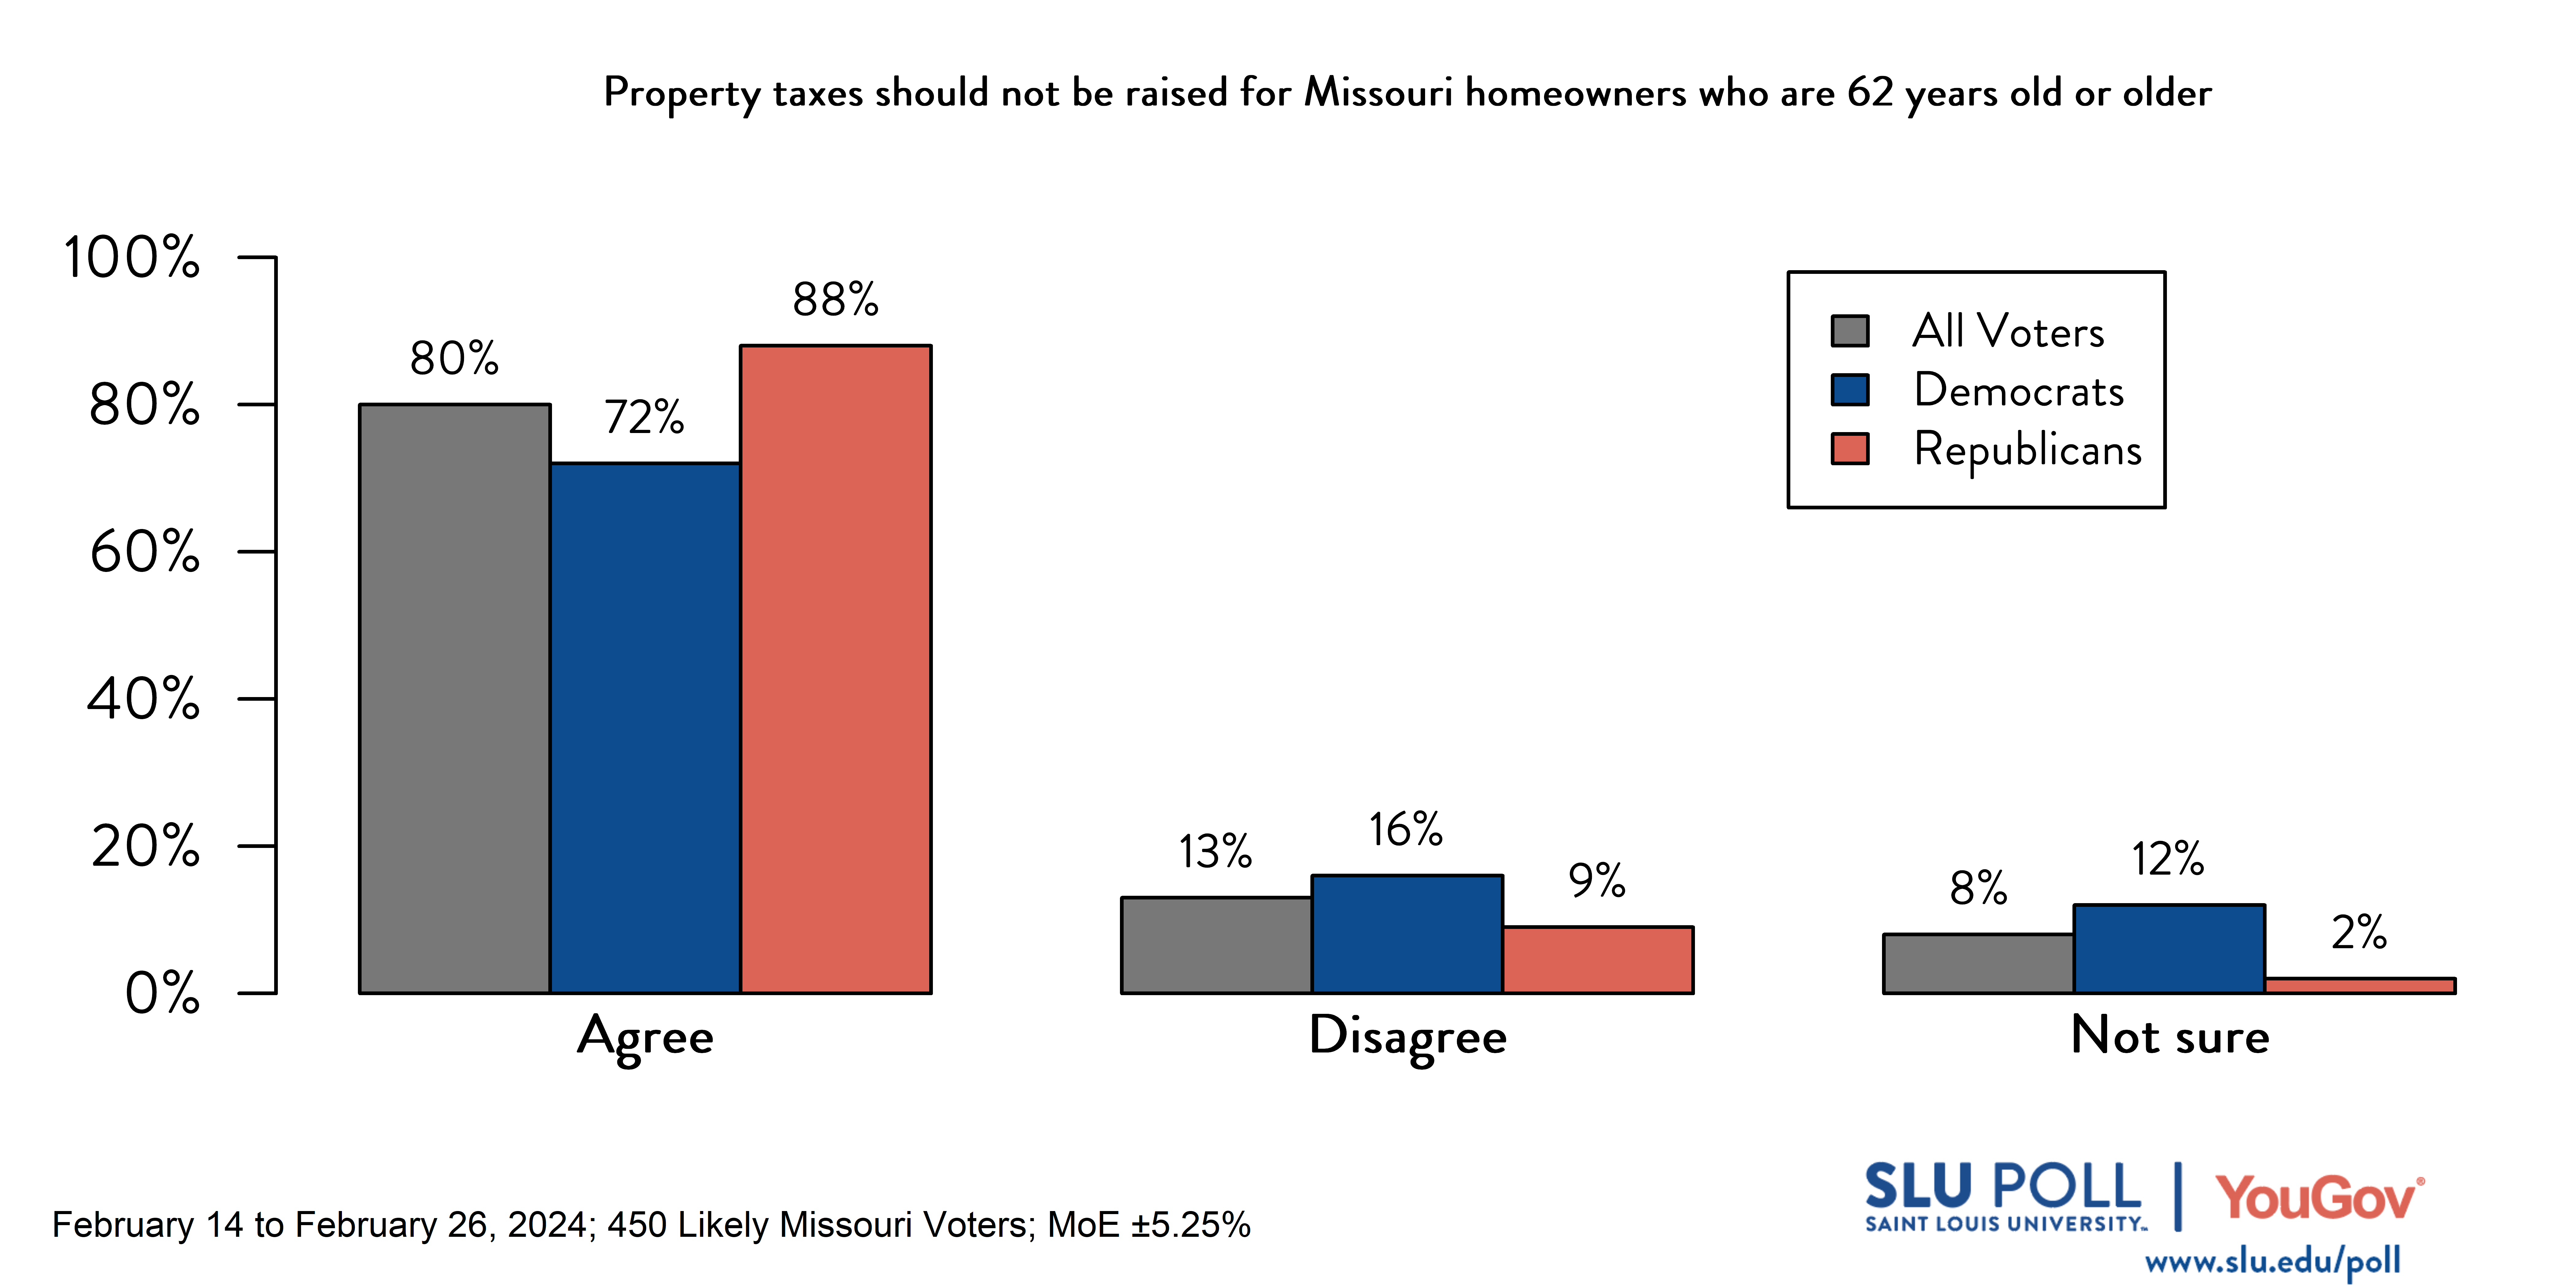 Likely voters' responses to 'Do you agree or disagree with the following statements…Property taxes should not be raised for Missouri homeowners who are 62 years old or older?': 80% Agree, 13% Disagree, and 8% Not Sure. Democratic voters' responses: ' 72% Agree, 16% Disagree, and 12% Not Sure. Republican voters' responses:  88% Agree, 9% Disagree, and 2% Not Sure.